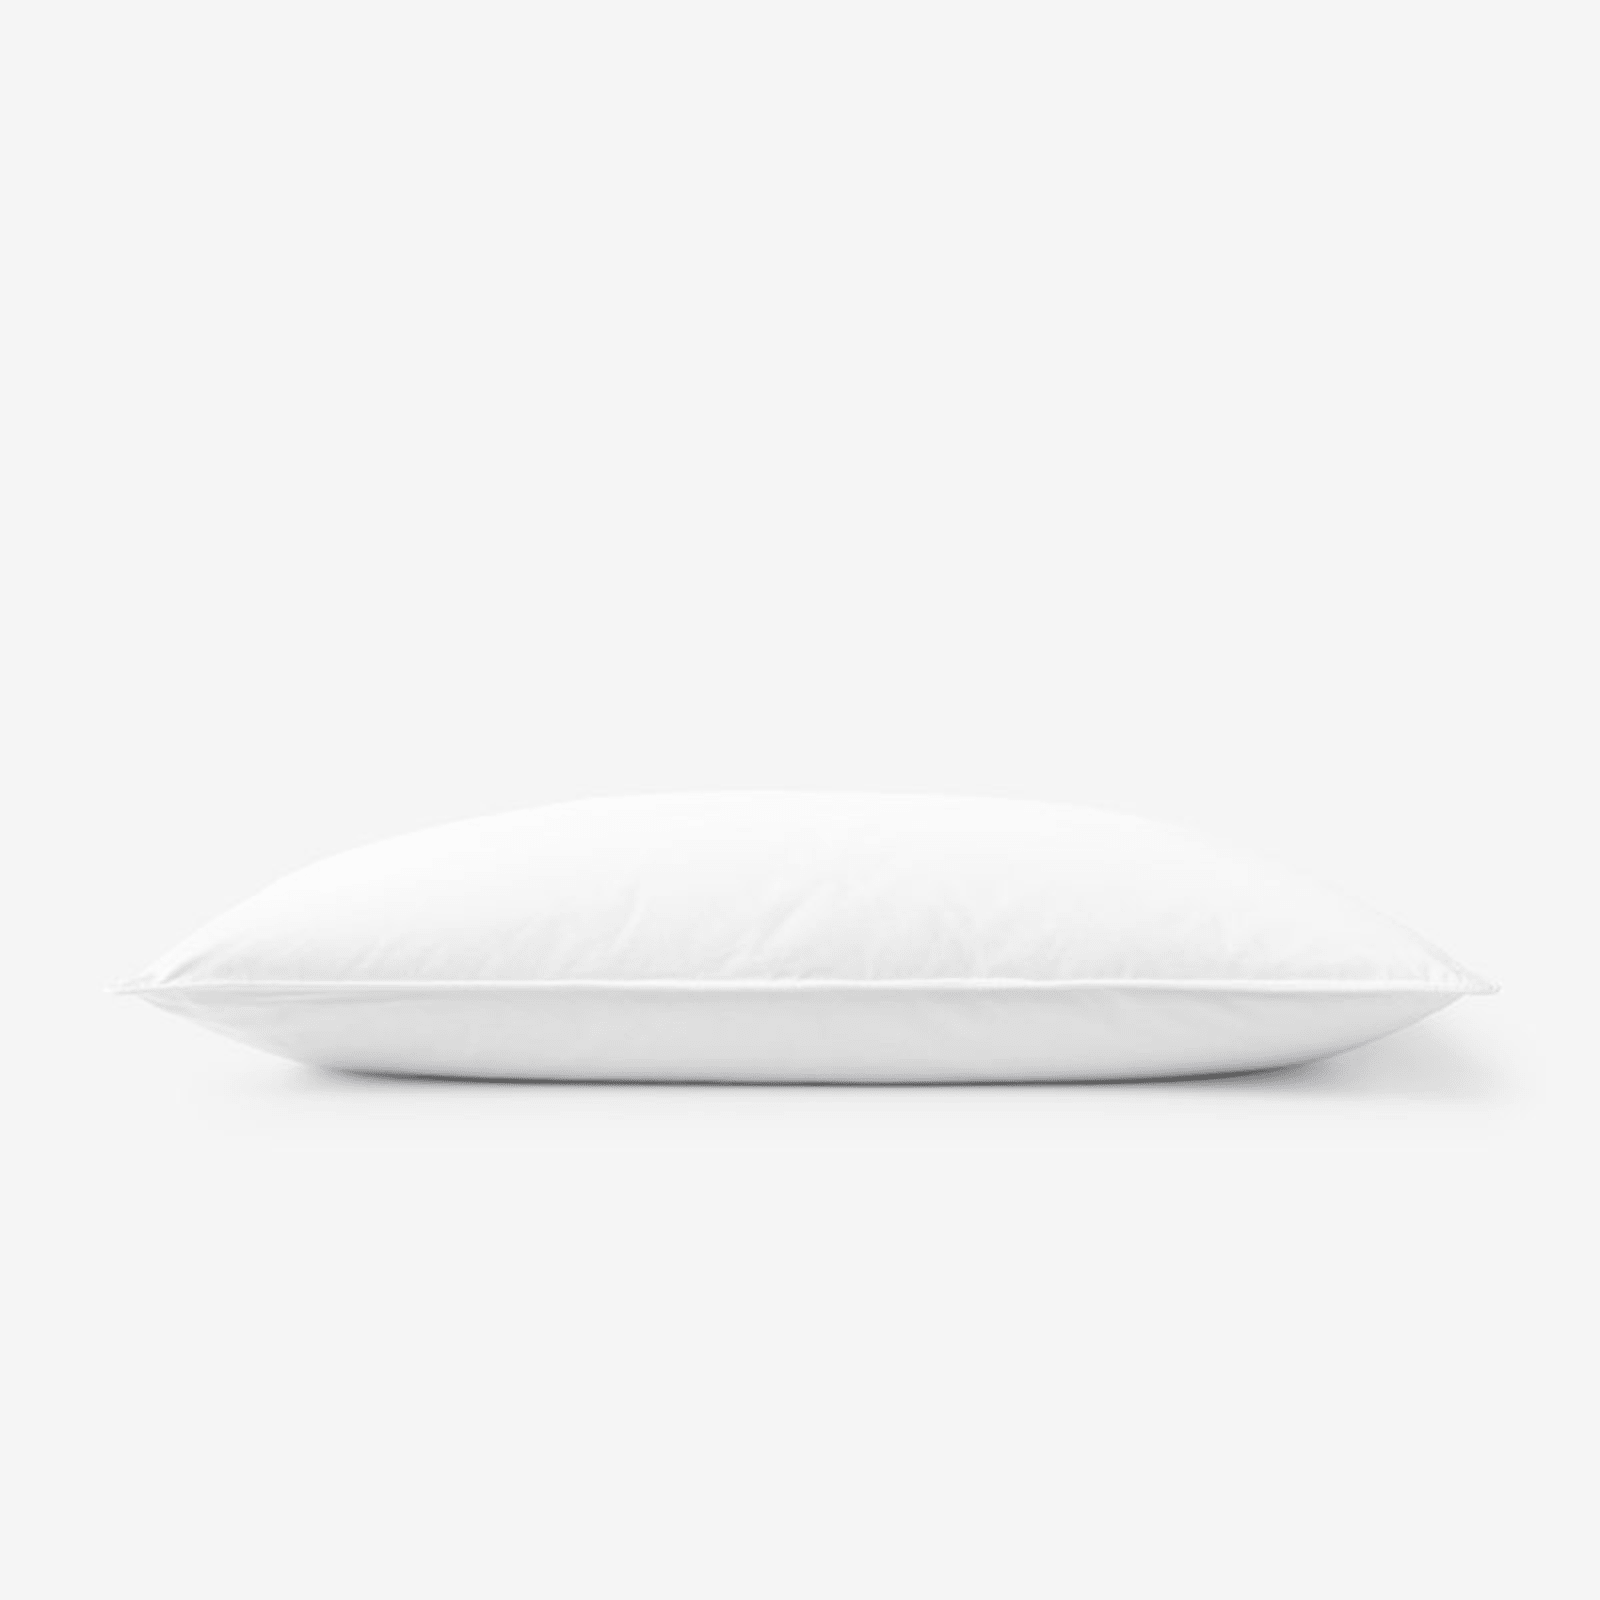 at Home Standard Less Expensive White Bed Pillows (2 ct)